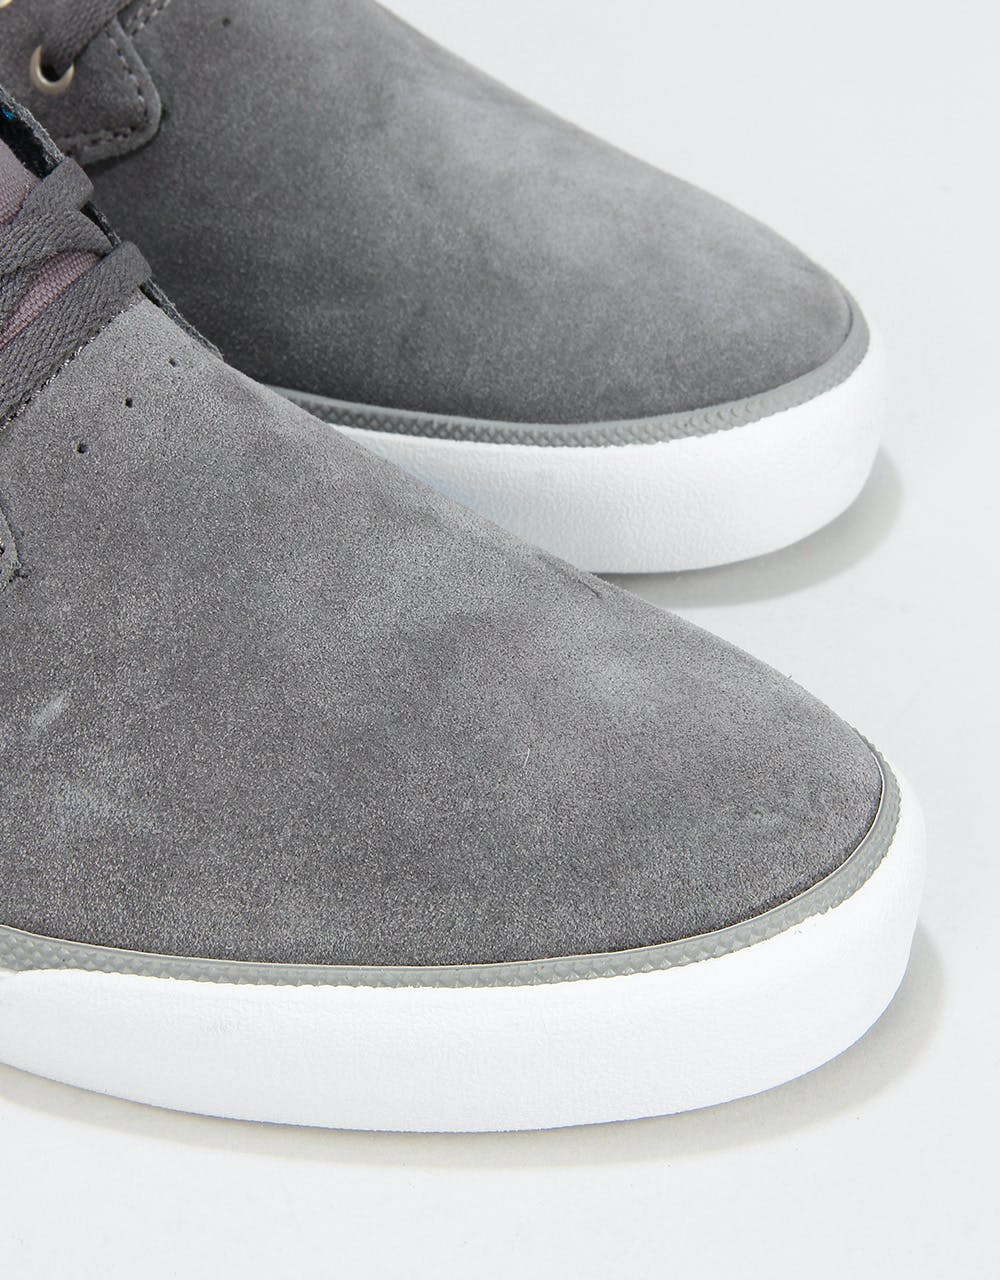 Lakai Daly Skate Shoes - Grey Suede